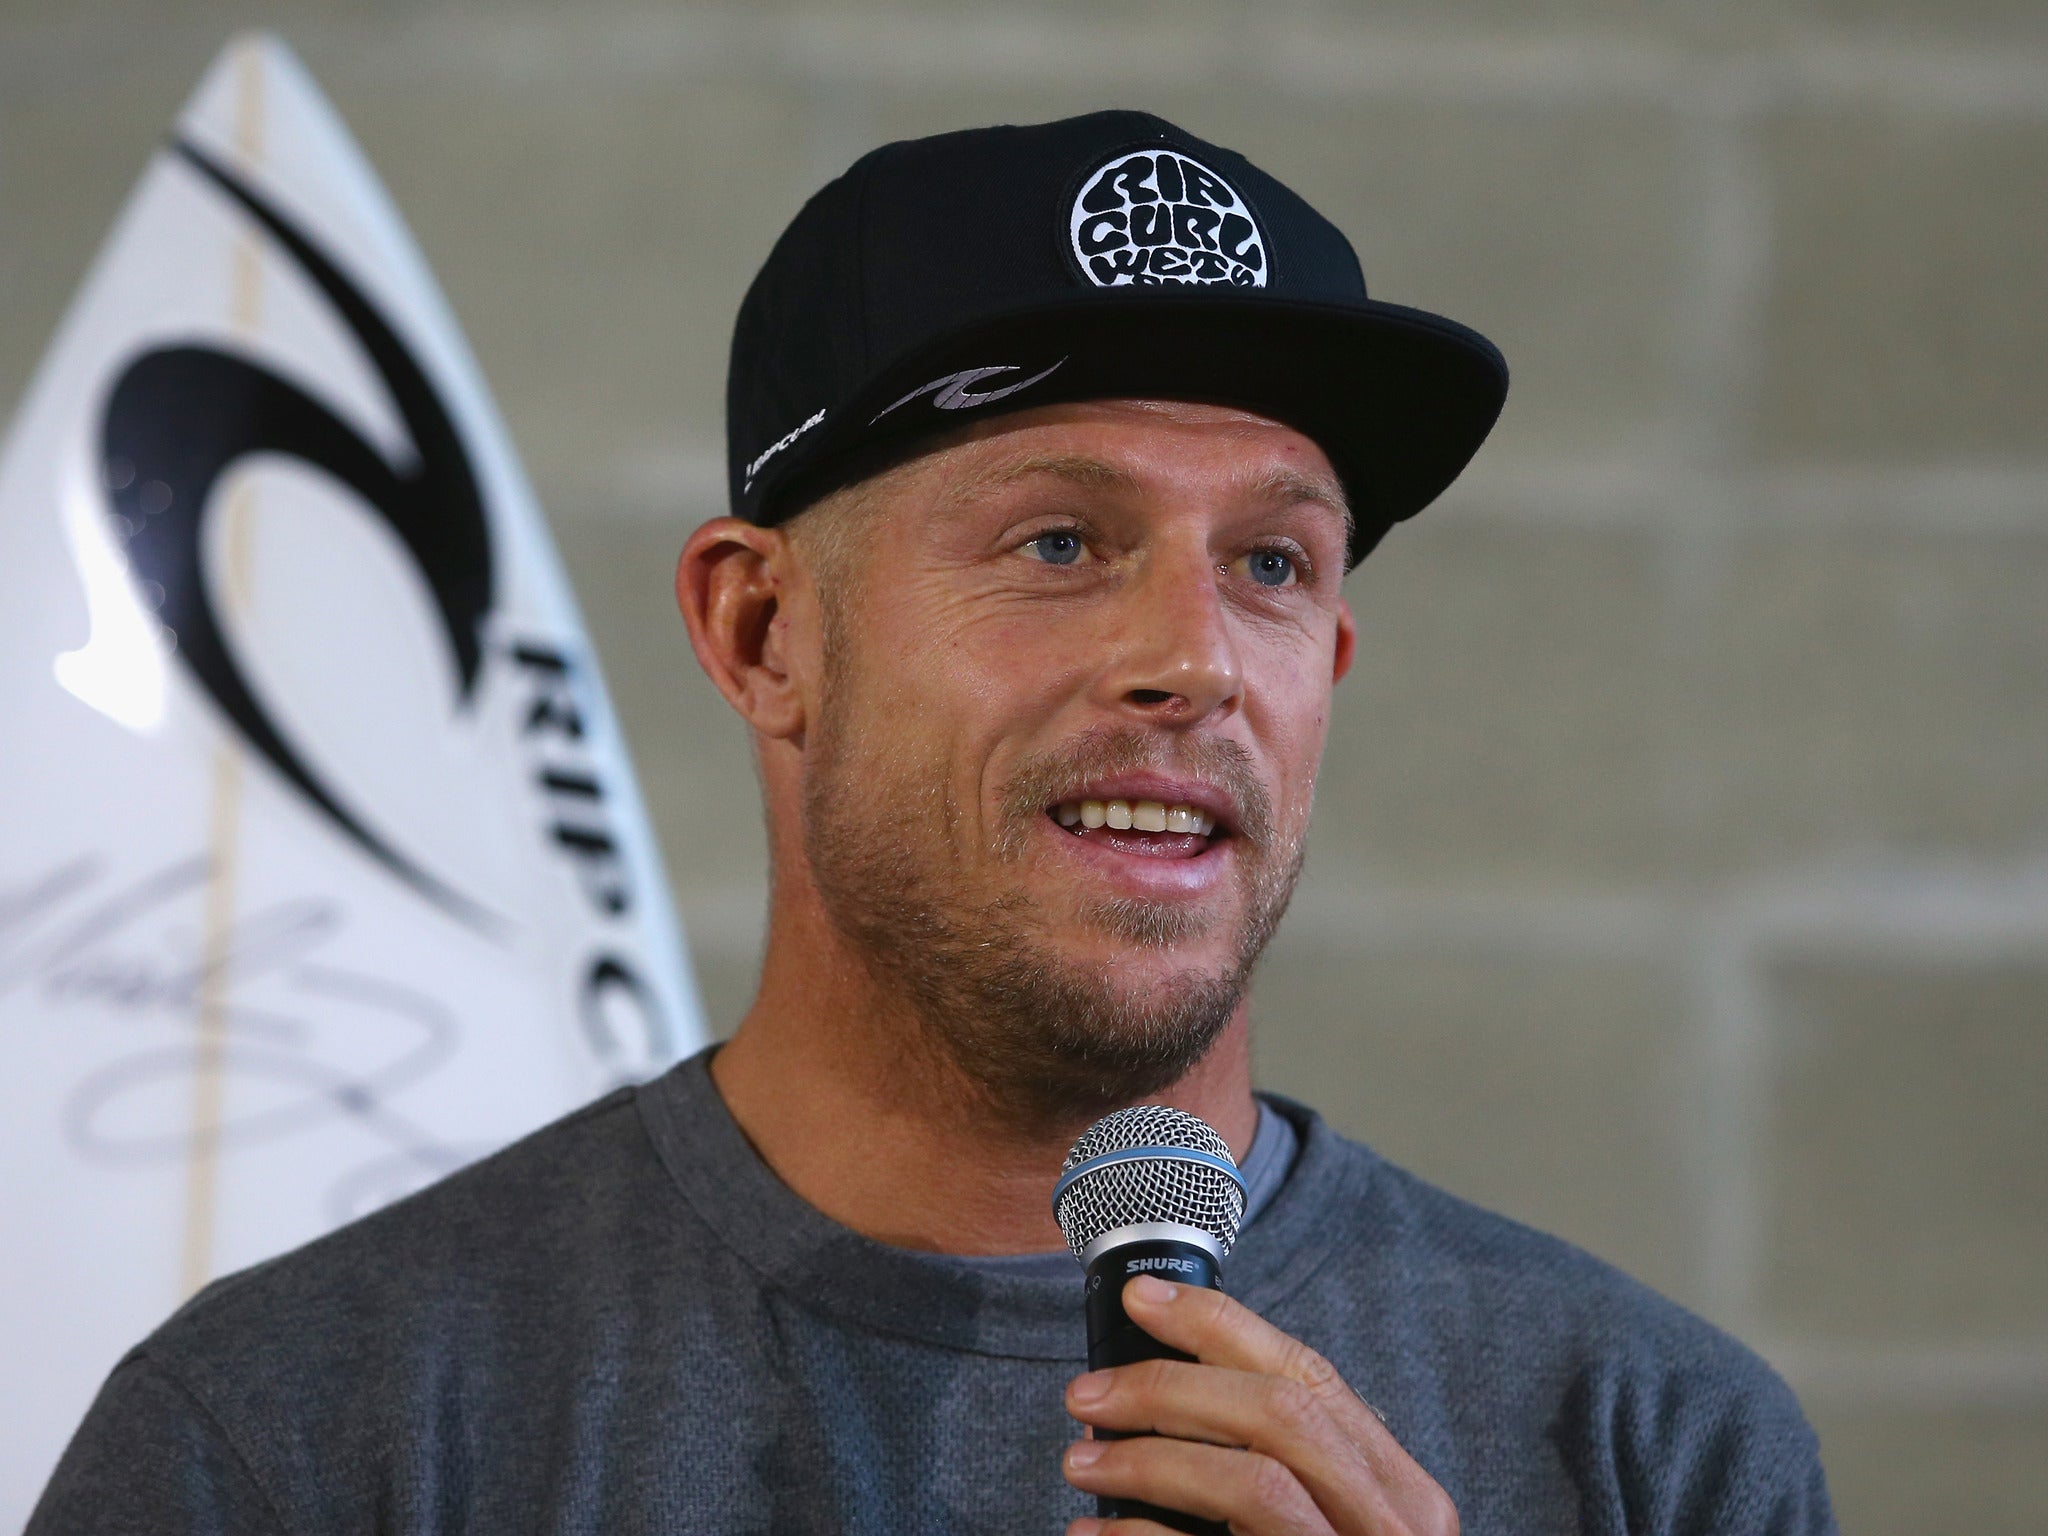 Fanning emerged unscathed from an encounter with a shark during the J-Bay Open in South Africa